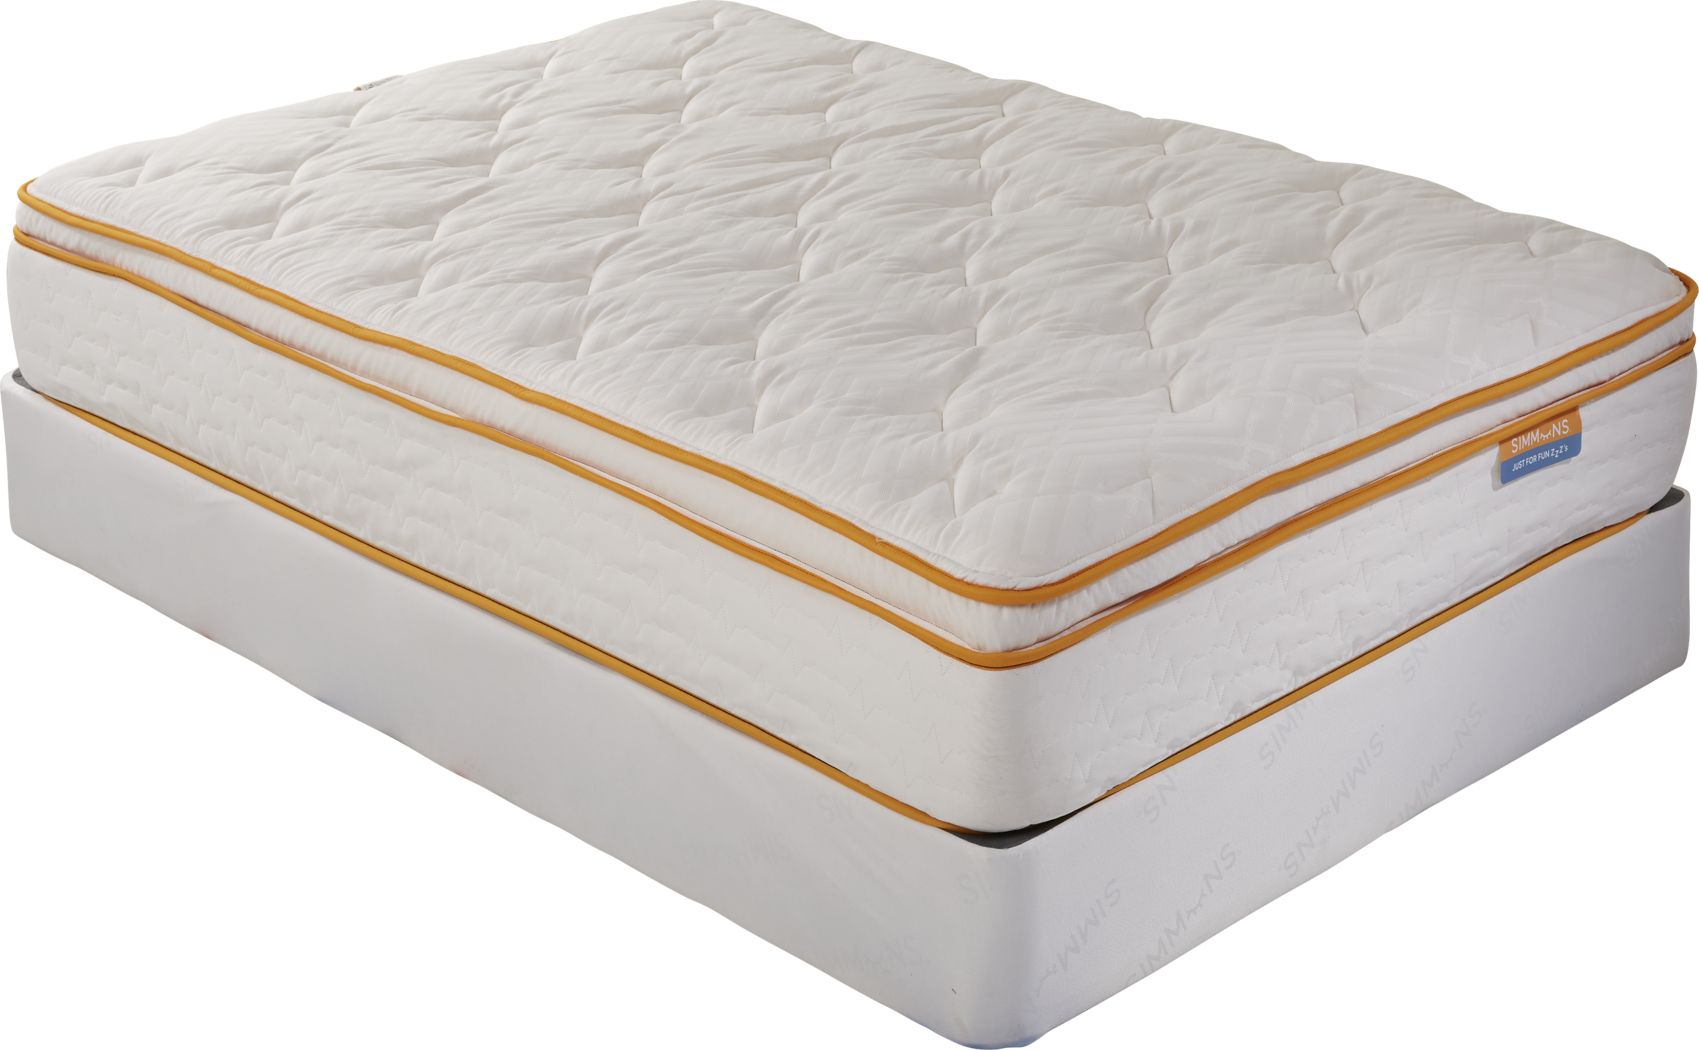 rooms to go pillow top mattresses